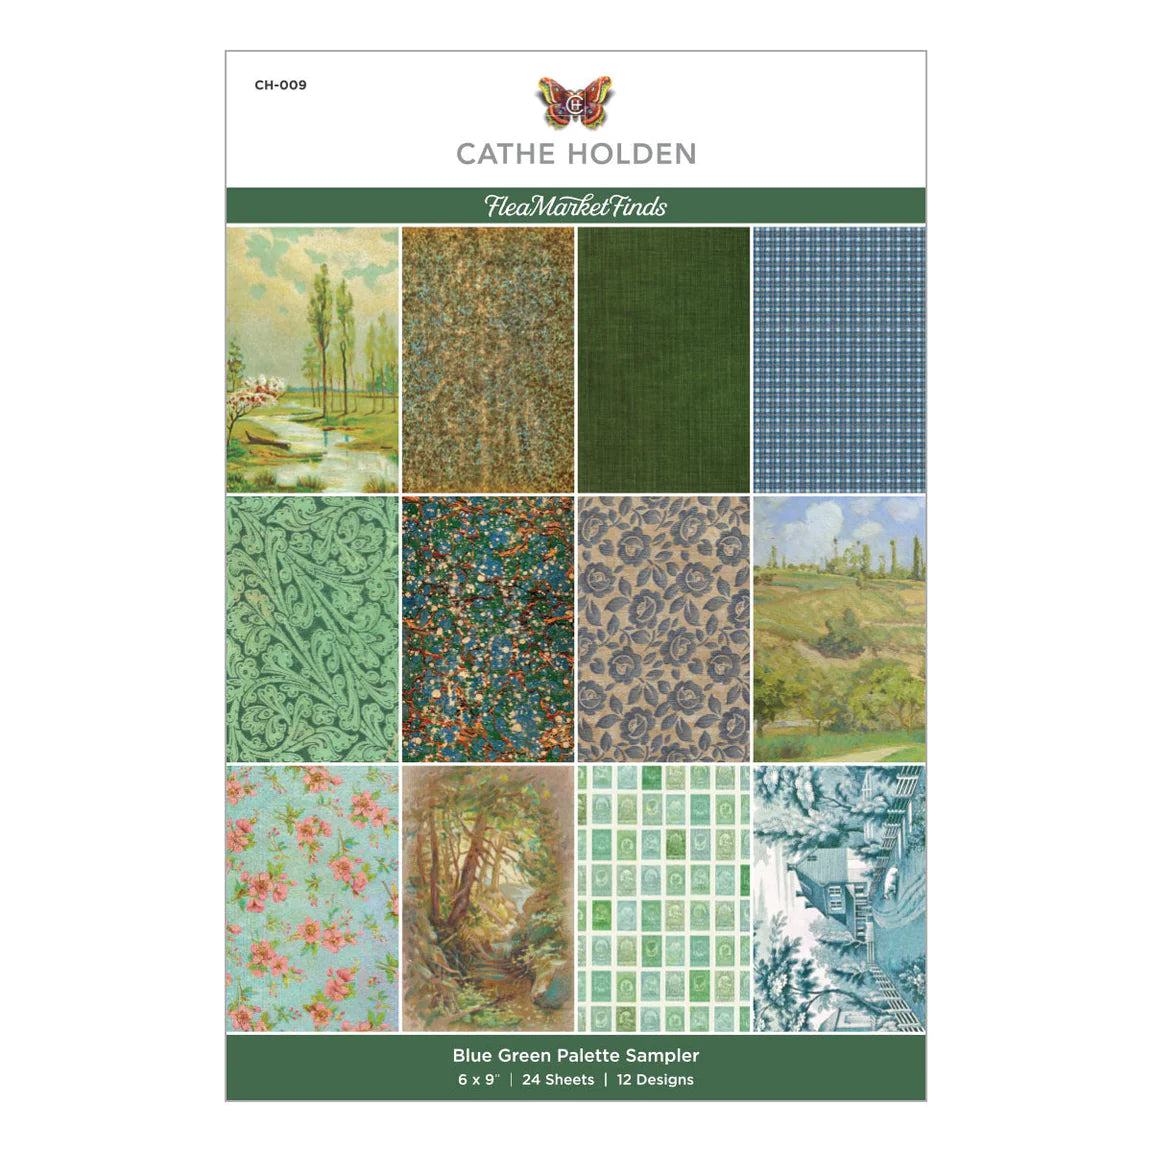 Spellbinders Blue Green Palette Sampler 6 x 9-inch Paper Pad from the Flea Market Finds Collection - CH-009